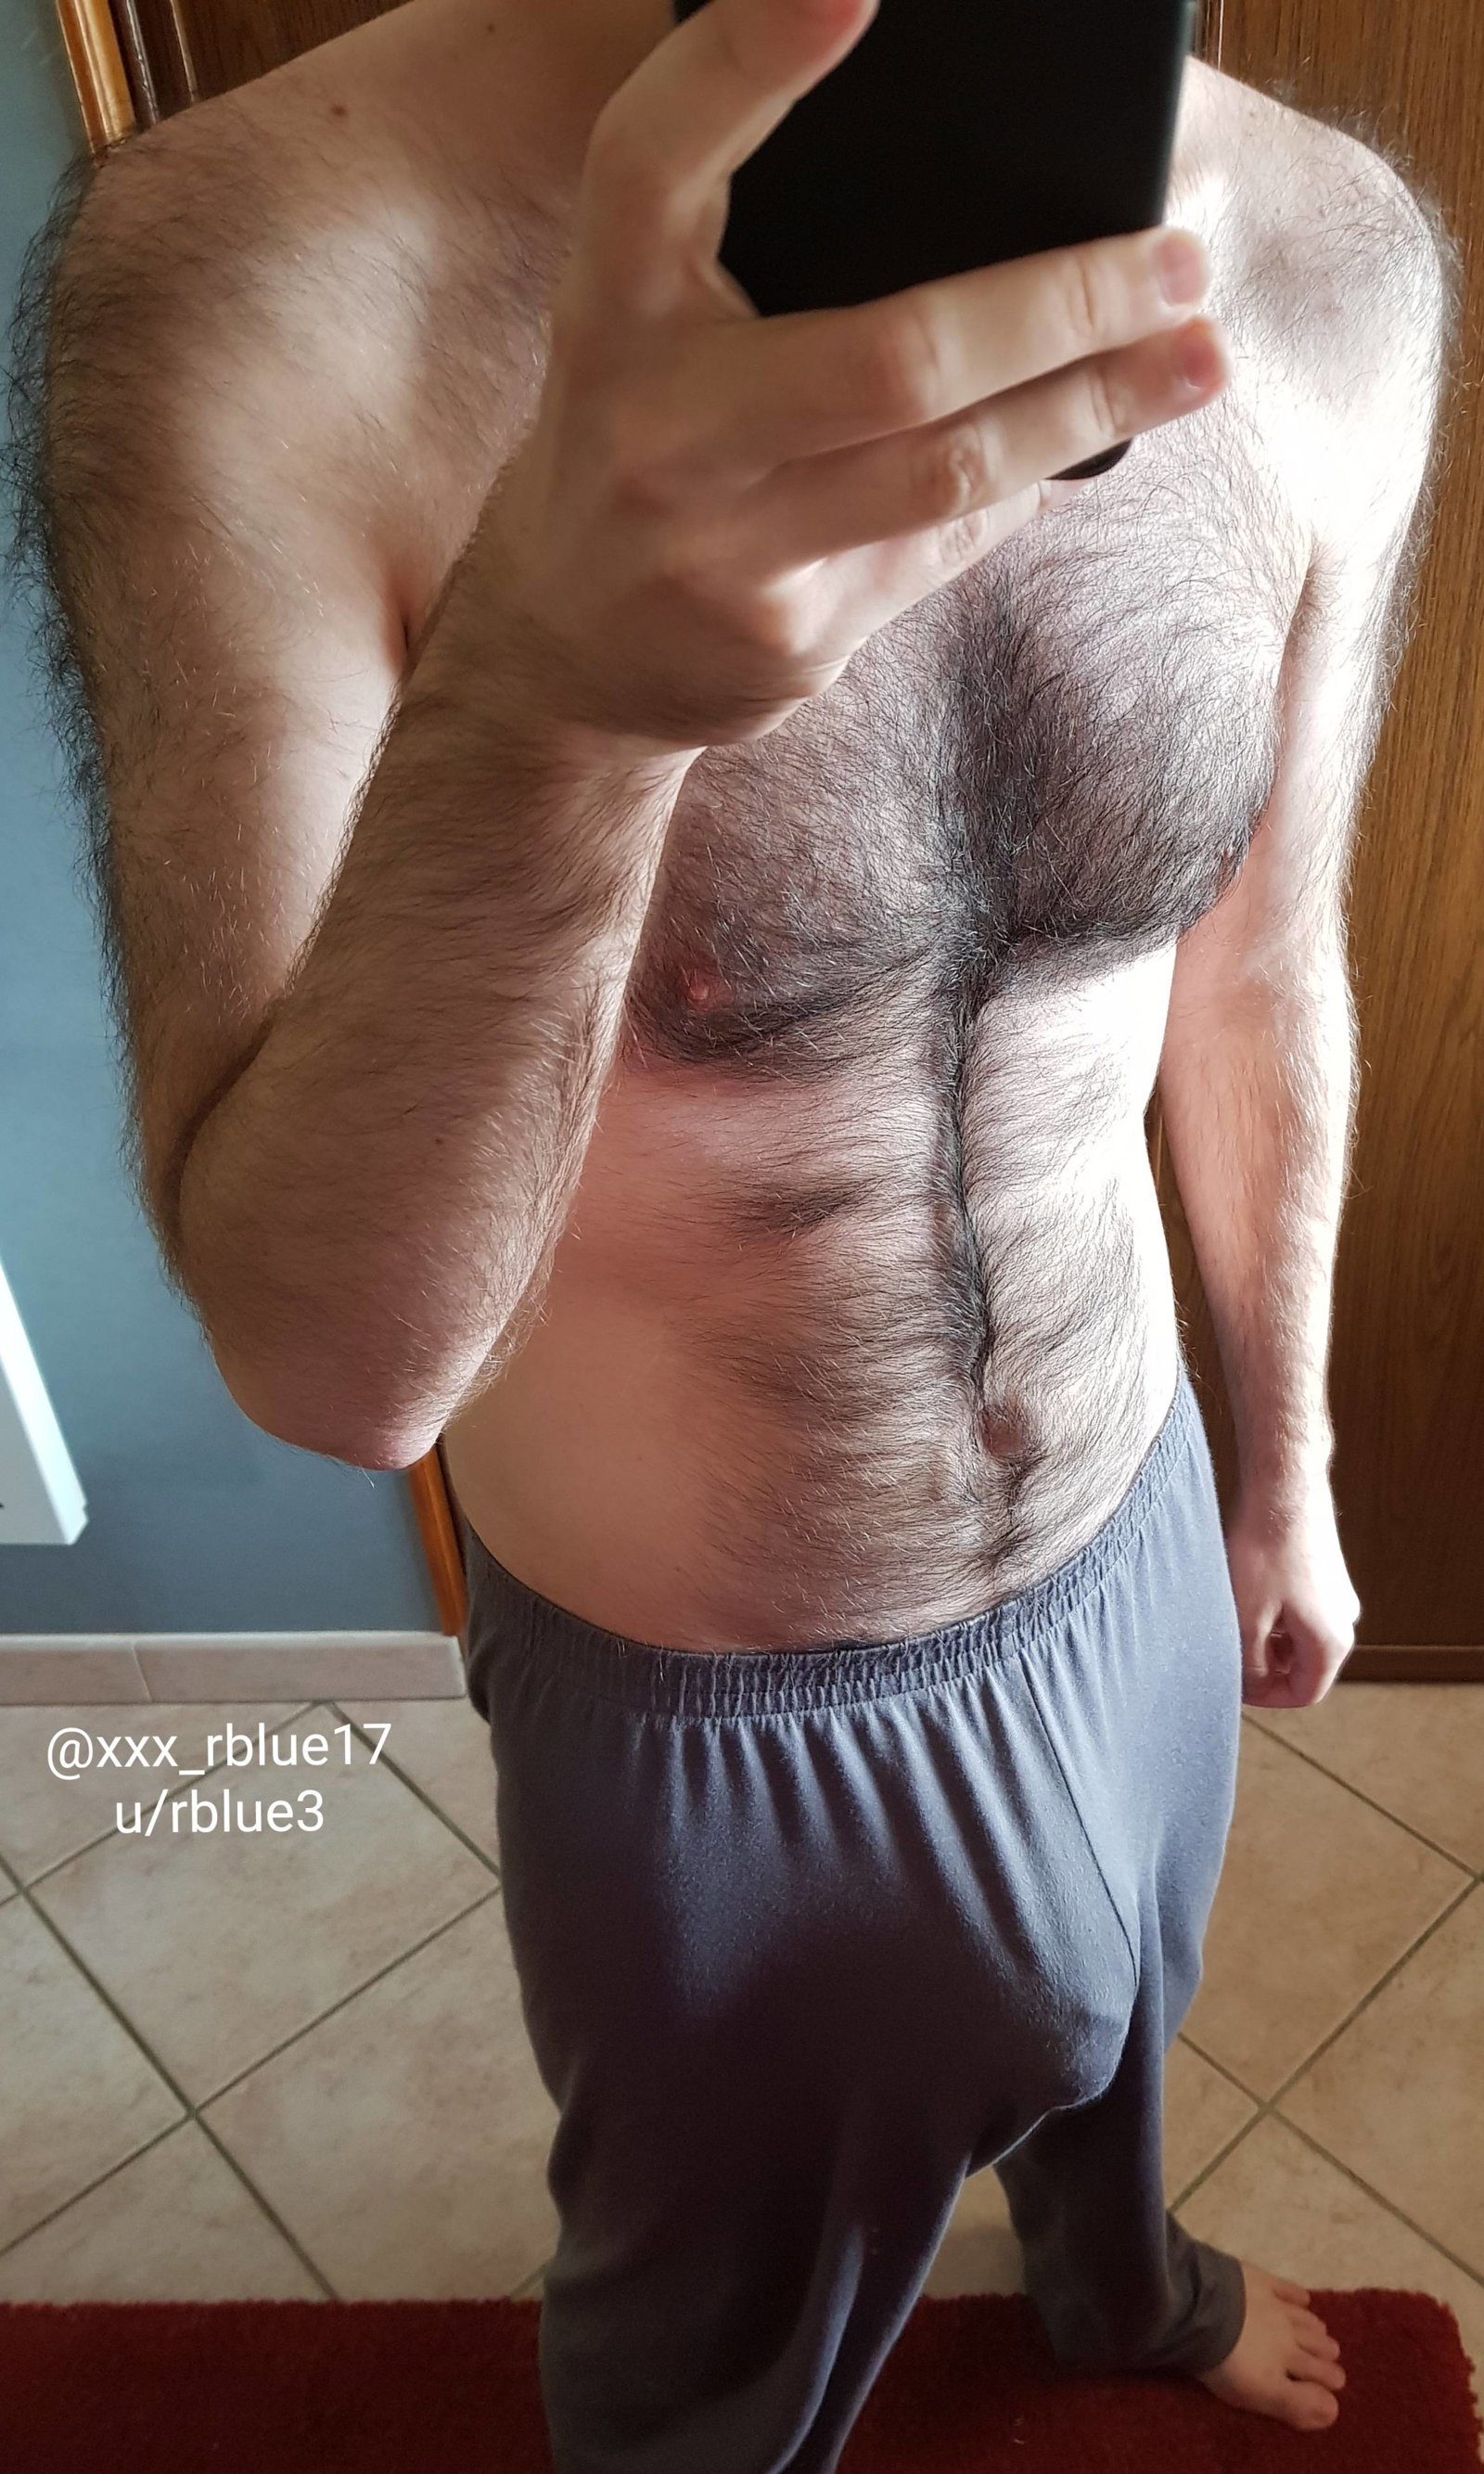 Watch the Photo by rblue with the username @rblue17, posted on October 23, 2019. The post is about the topic GayExTumblr. and the text says 'These pyjama pants don't leave much to the imagination... https://i.imgur.com/3nKojZY.jpg'